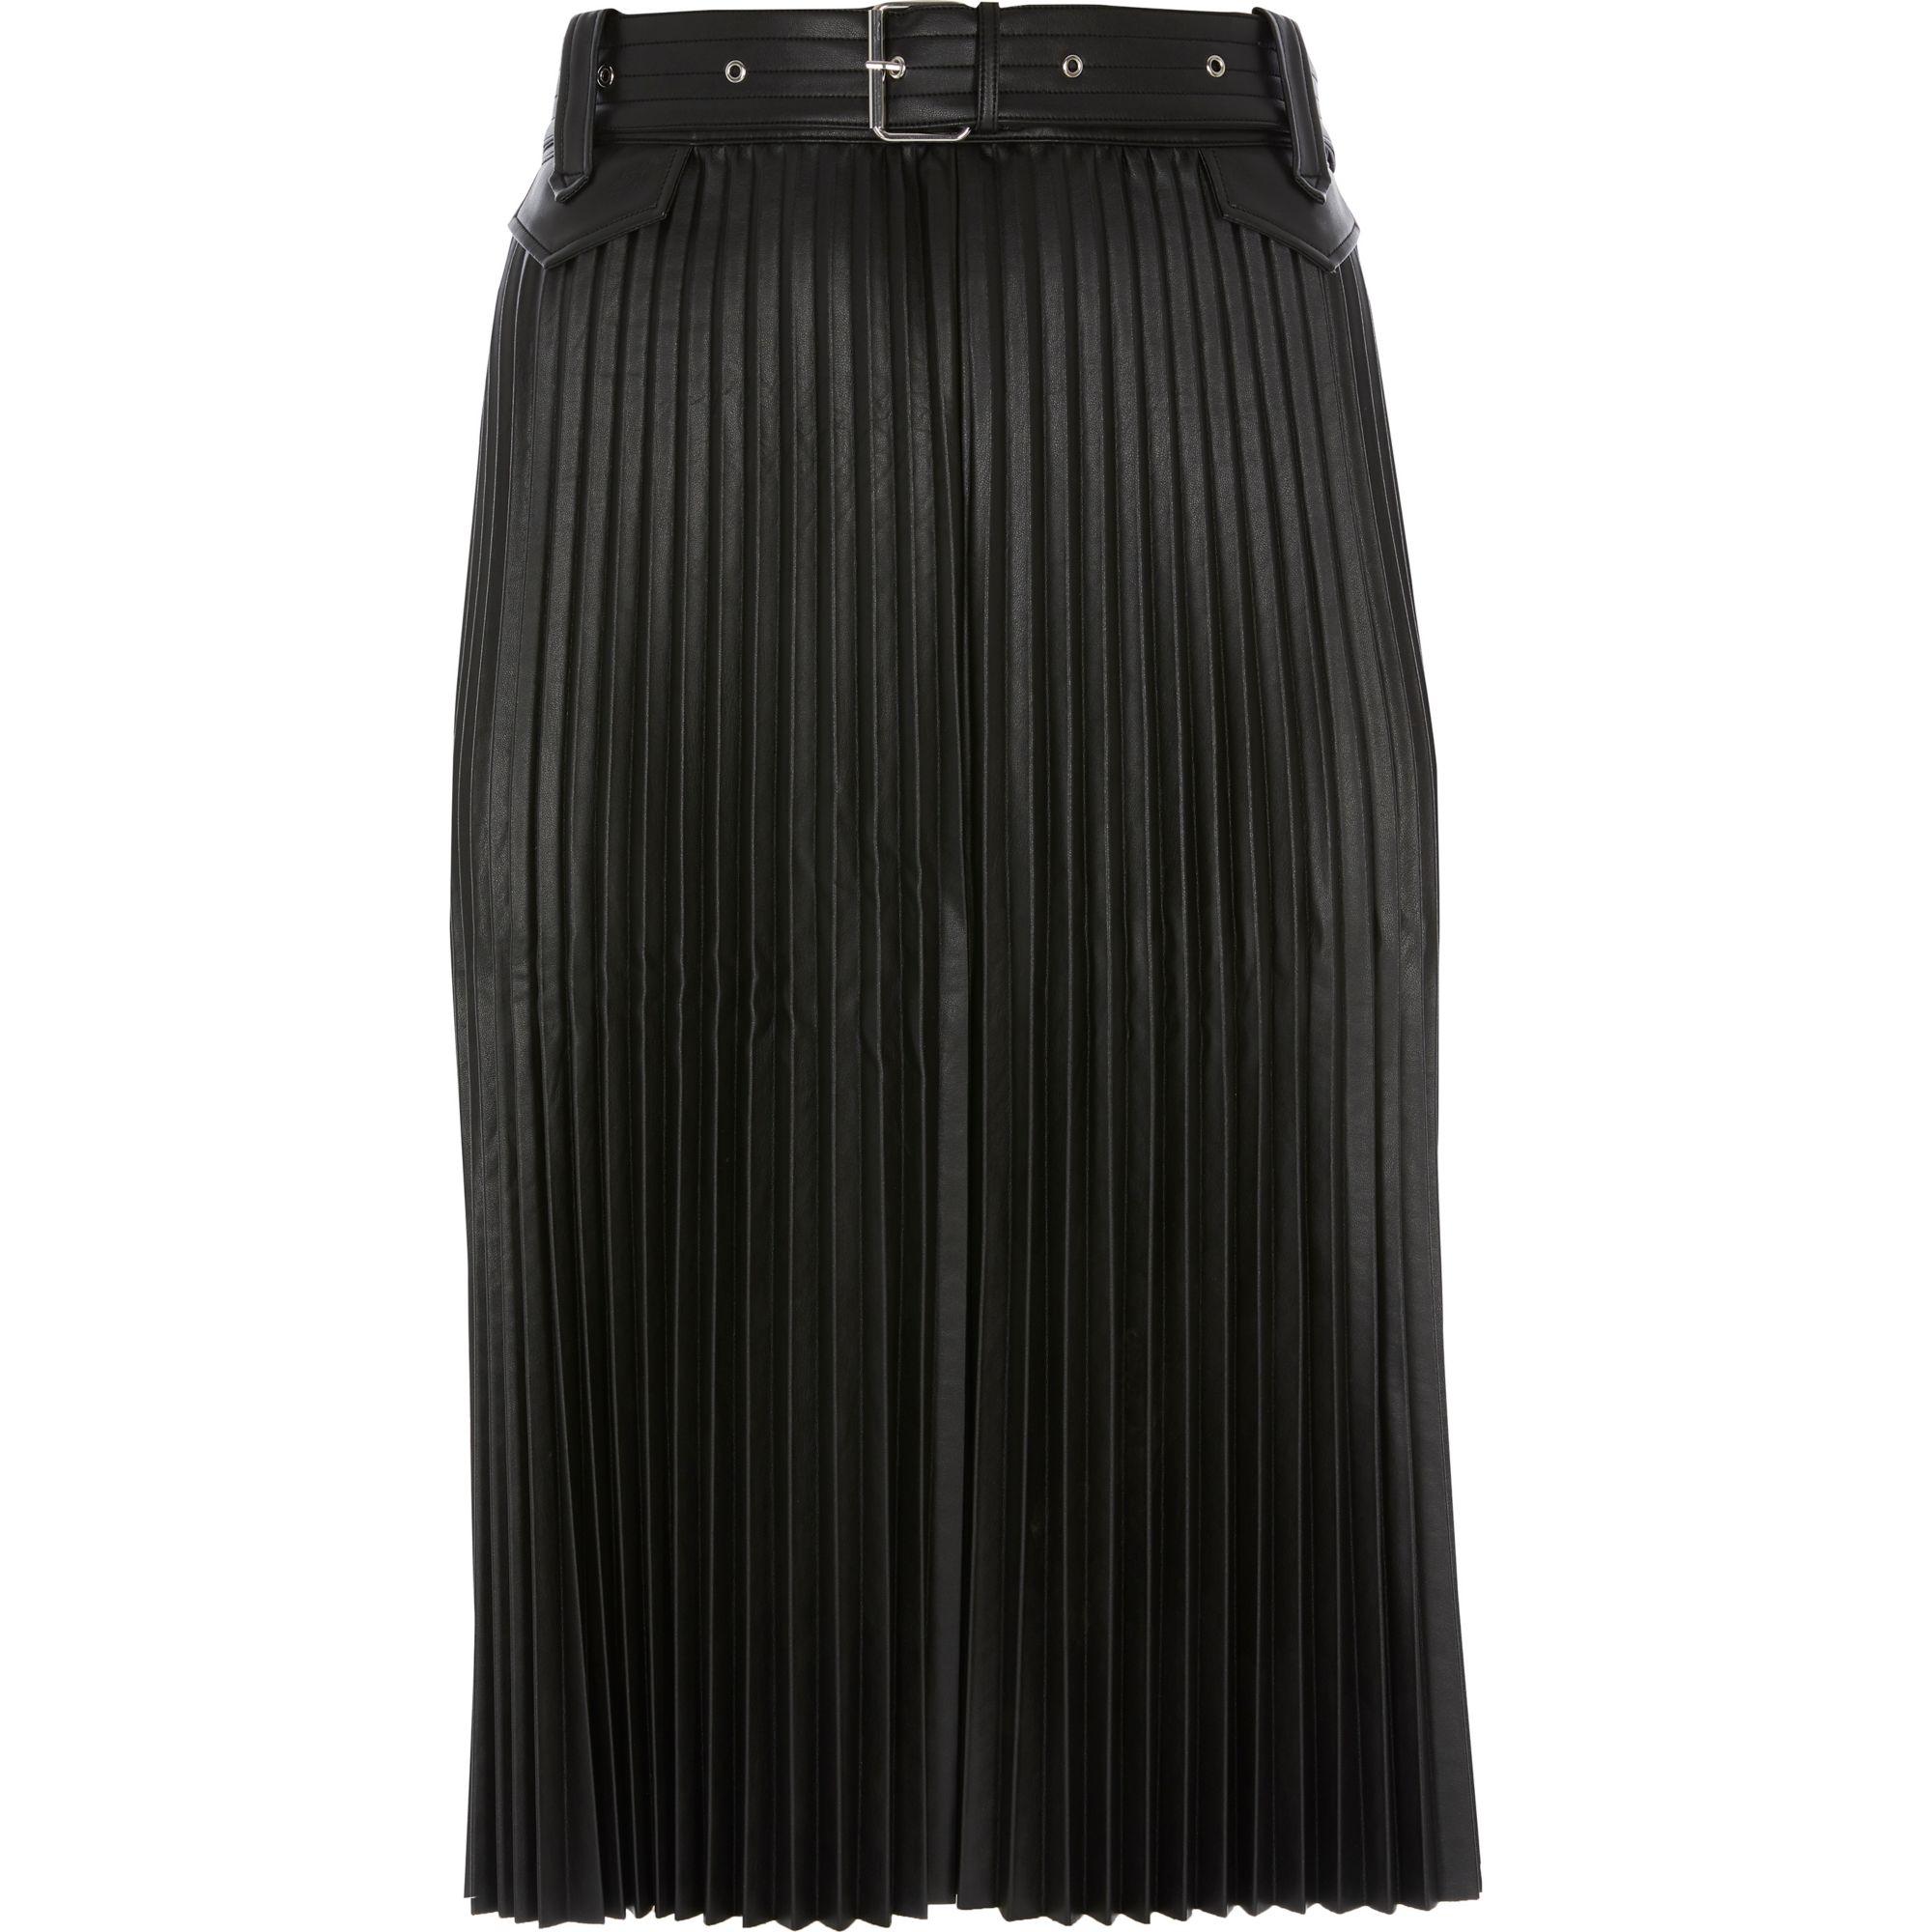 River Island Plus Faux Leather Pleated Midi Skirt in Black - Lyst